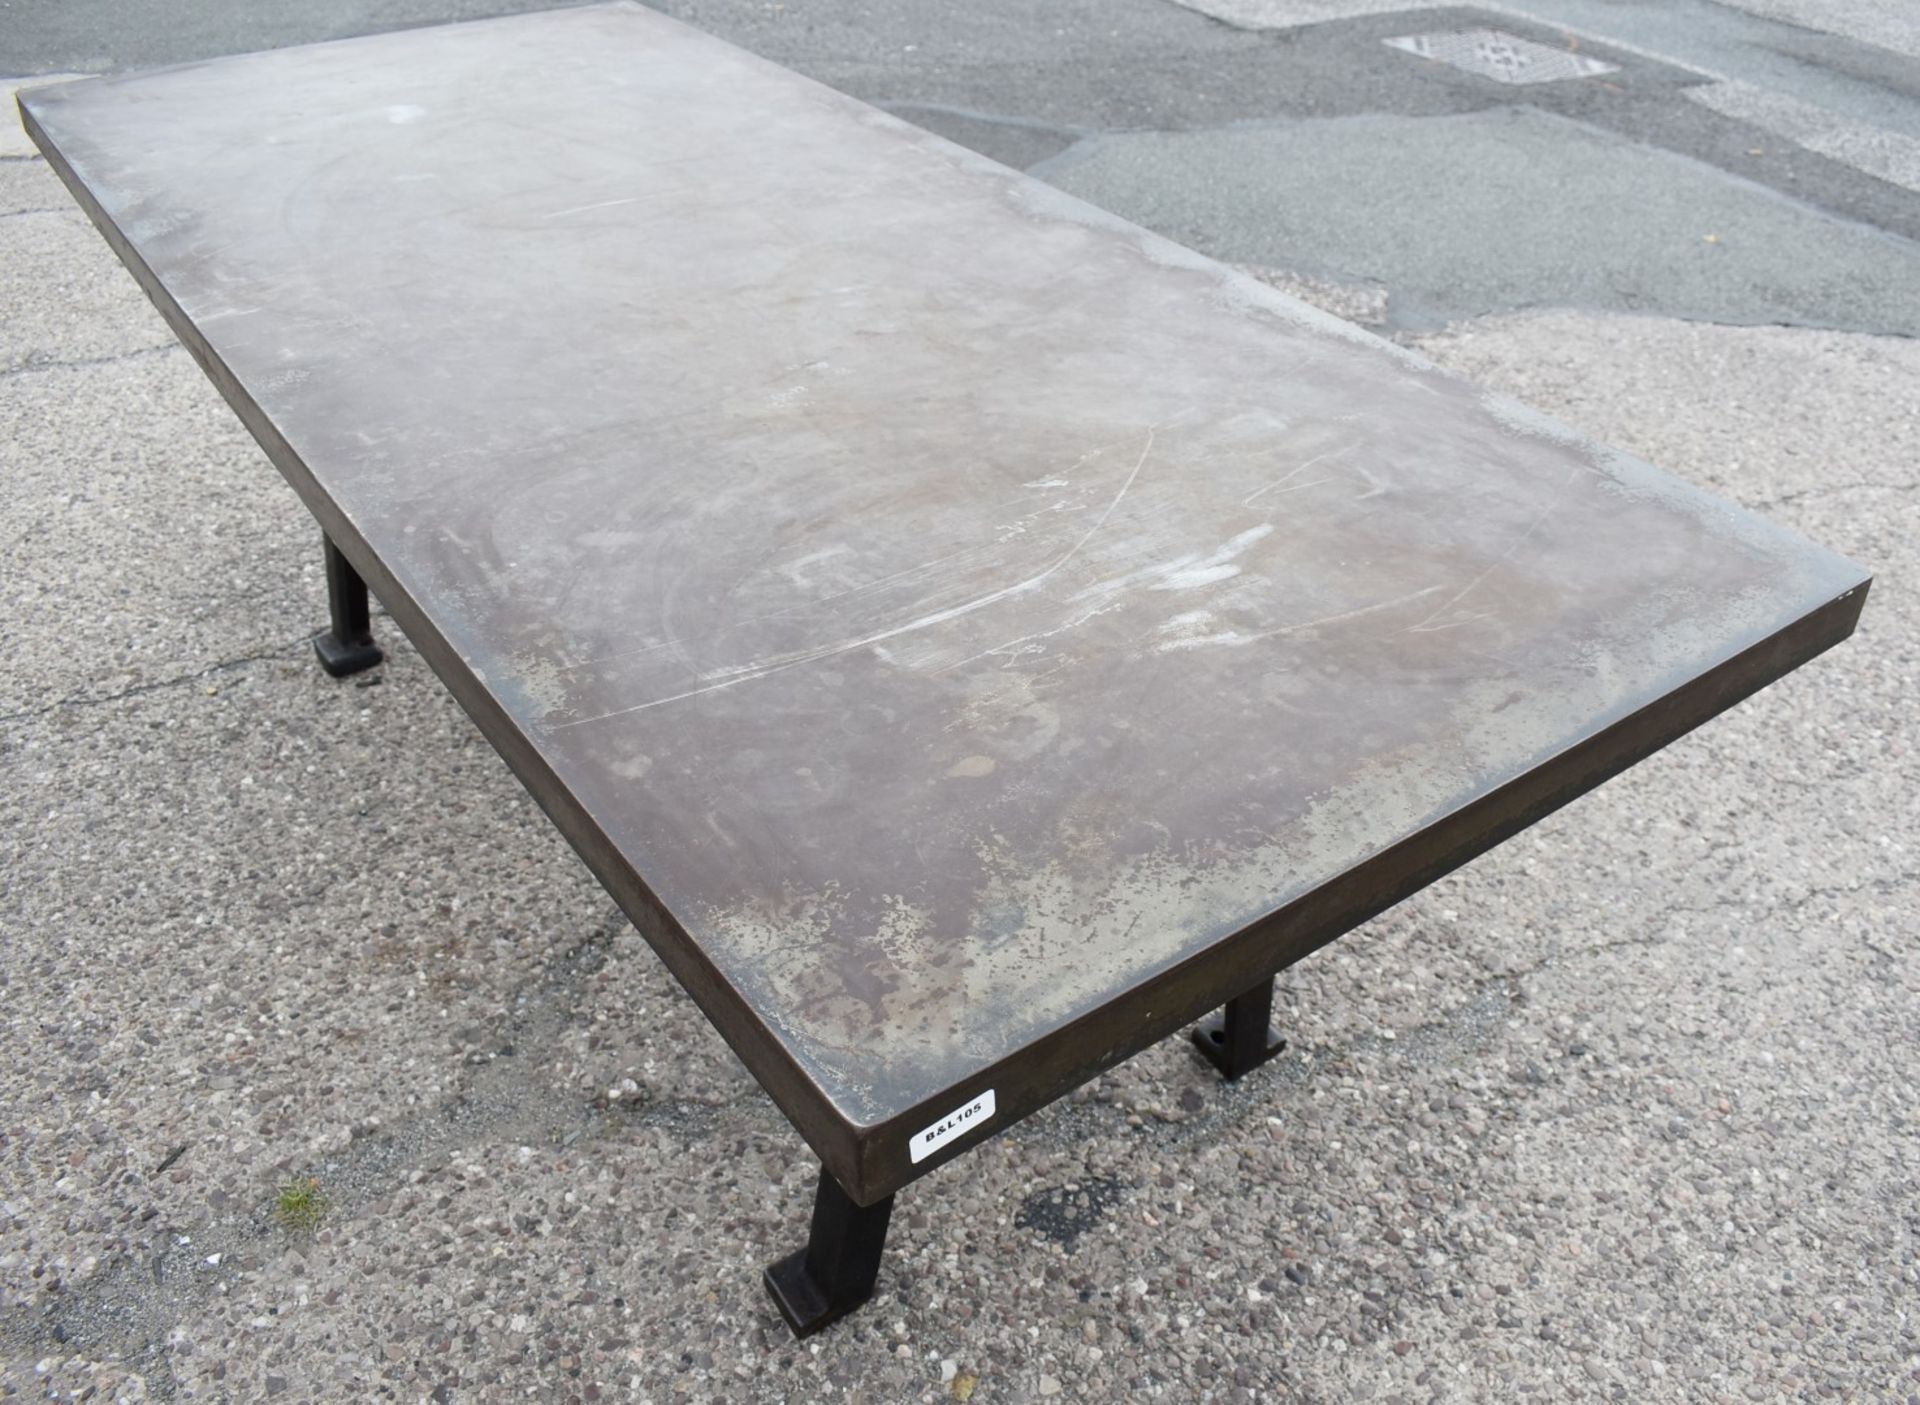 1 x Industrial Style 200cm Banquetting Restaurant Table Featuring a Heavy Steel Top & Steel Legs - Image 14 of 23